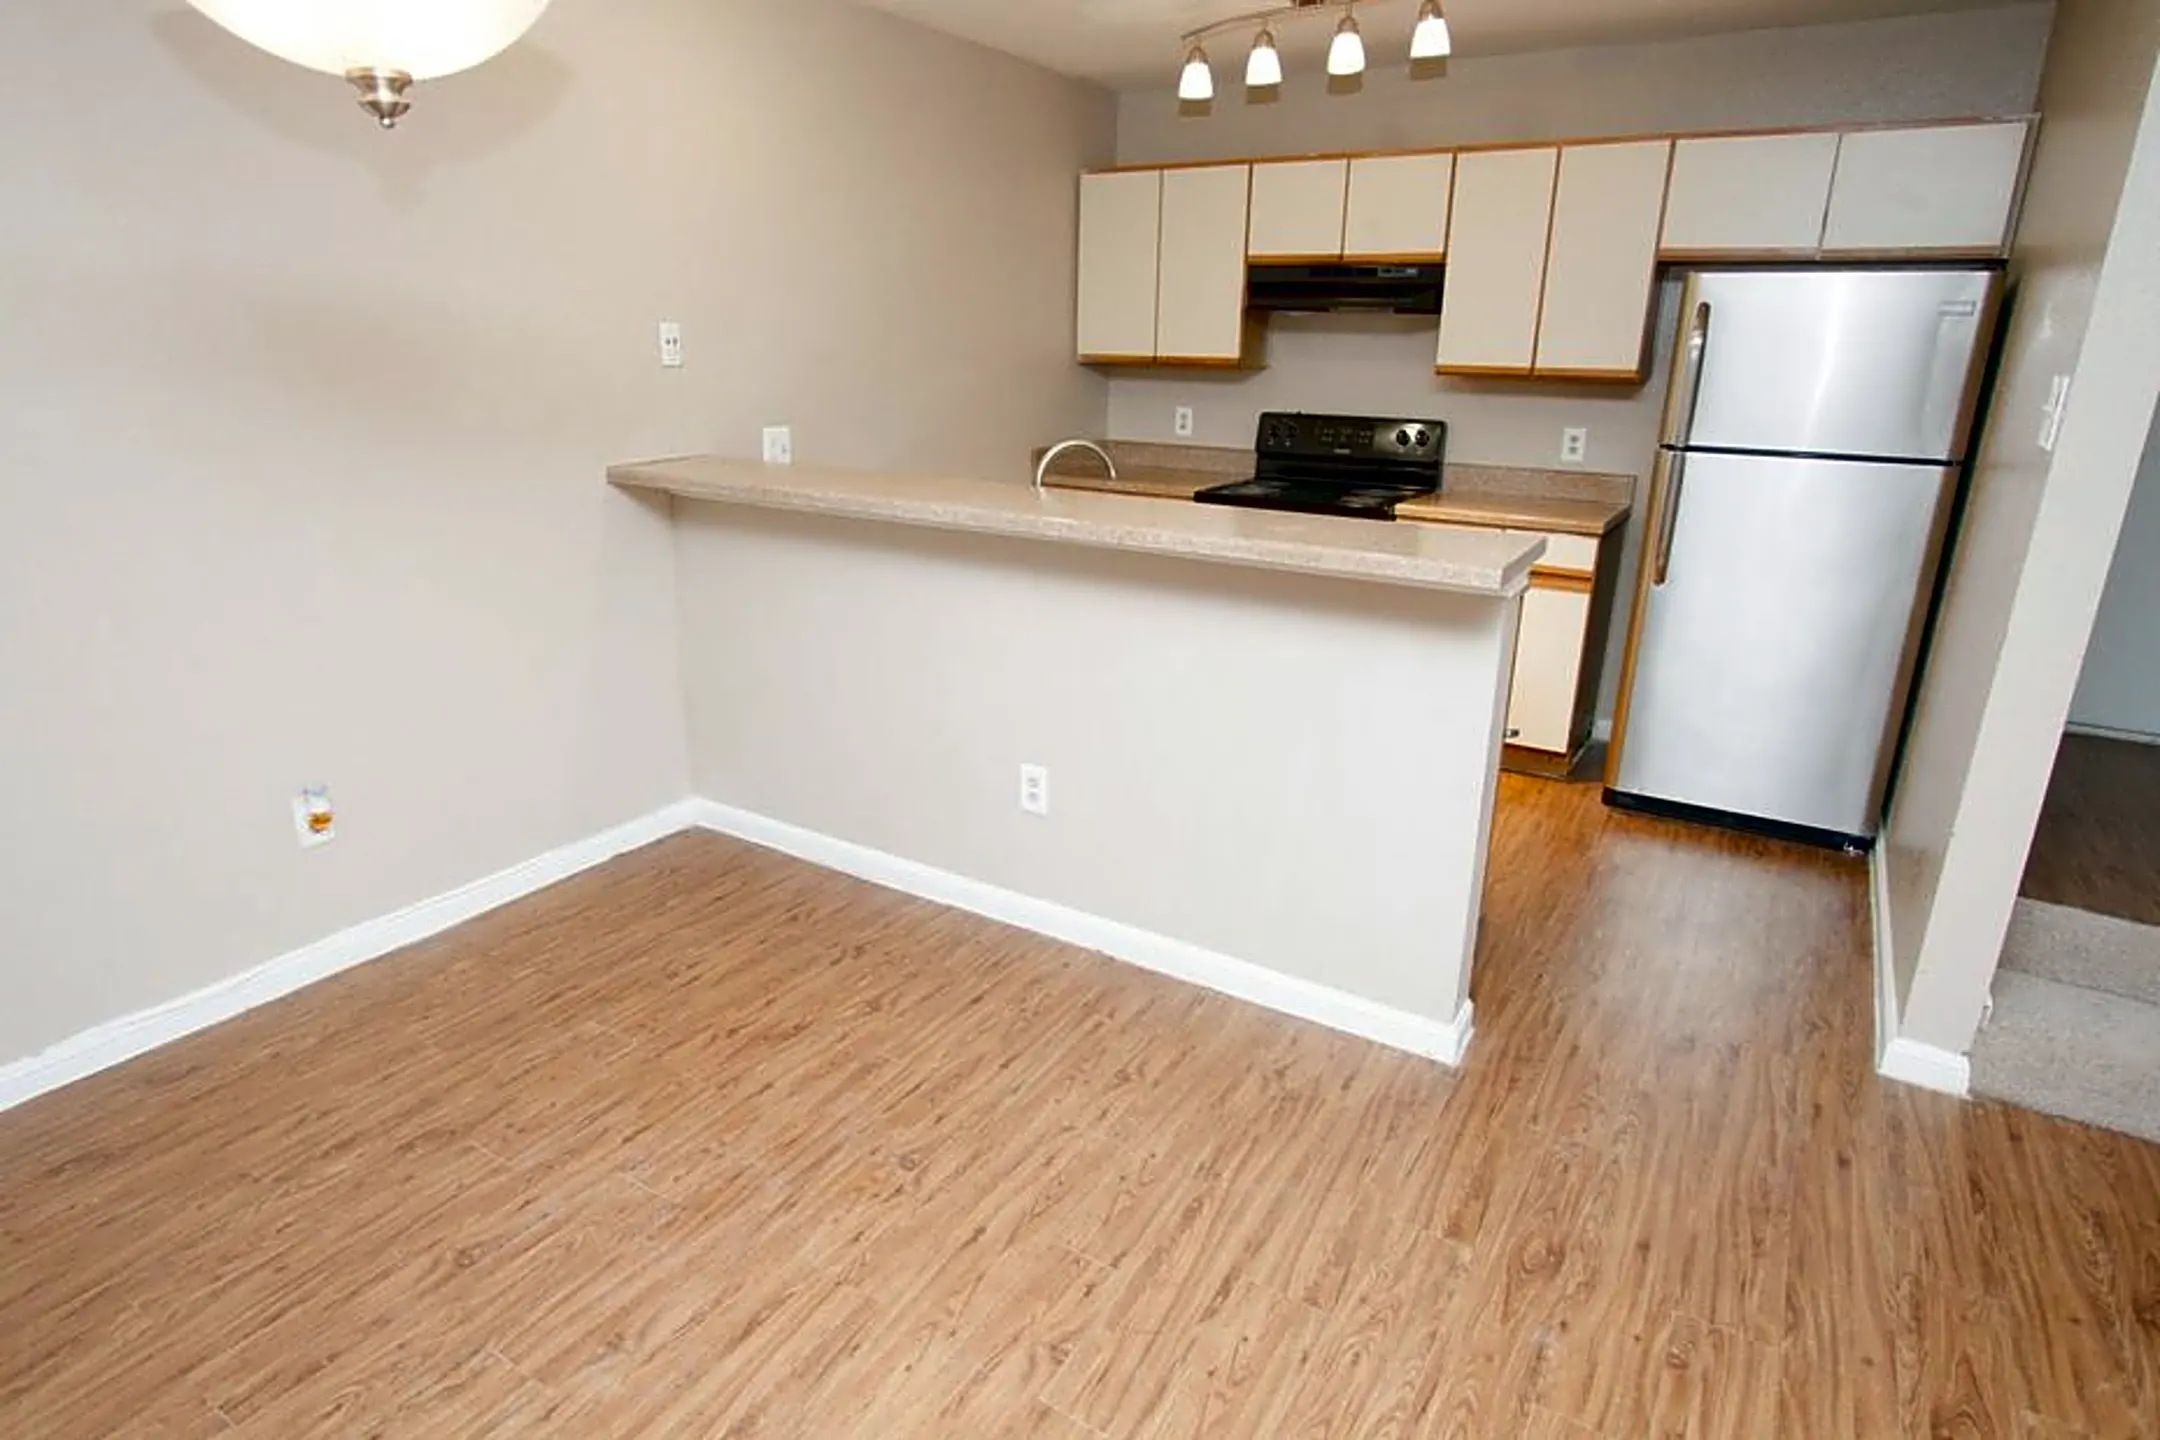 Kitchen - The Townhomes on Three - Webster, TX